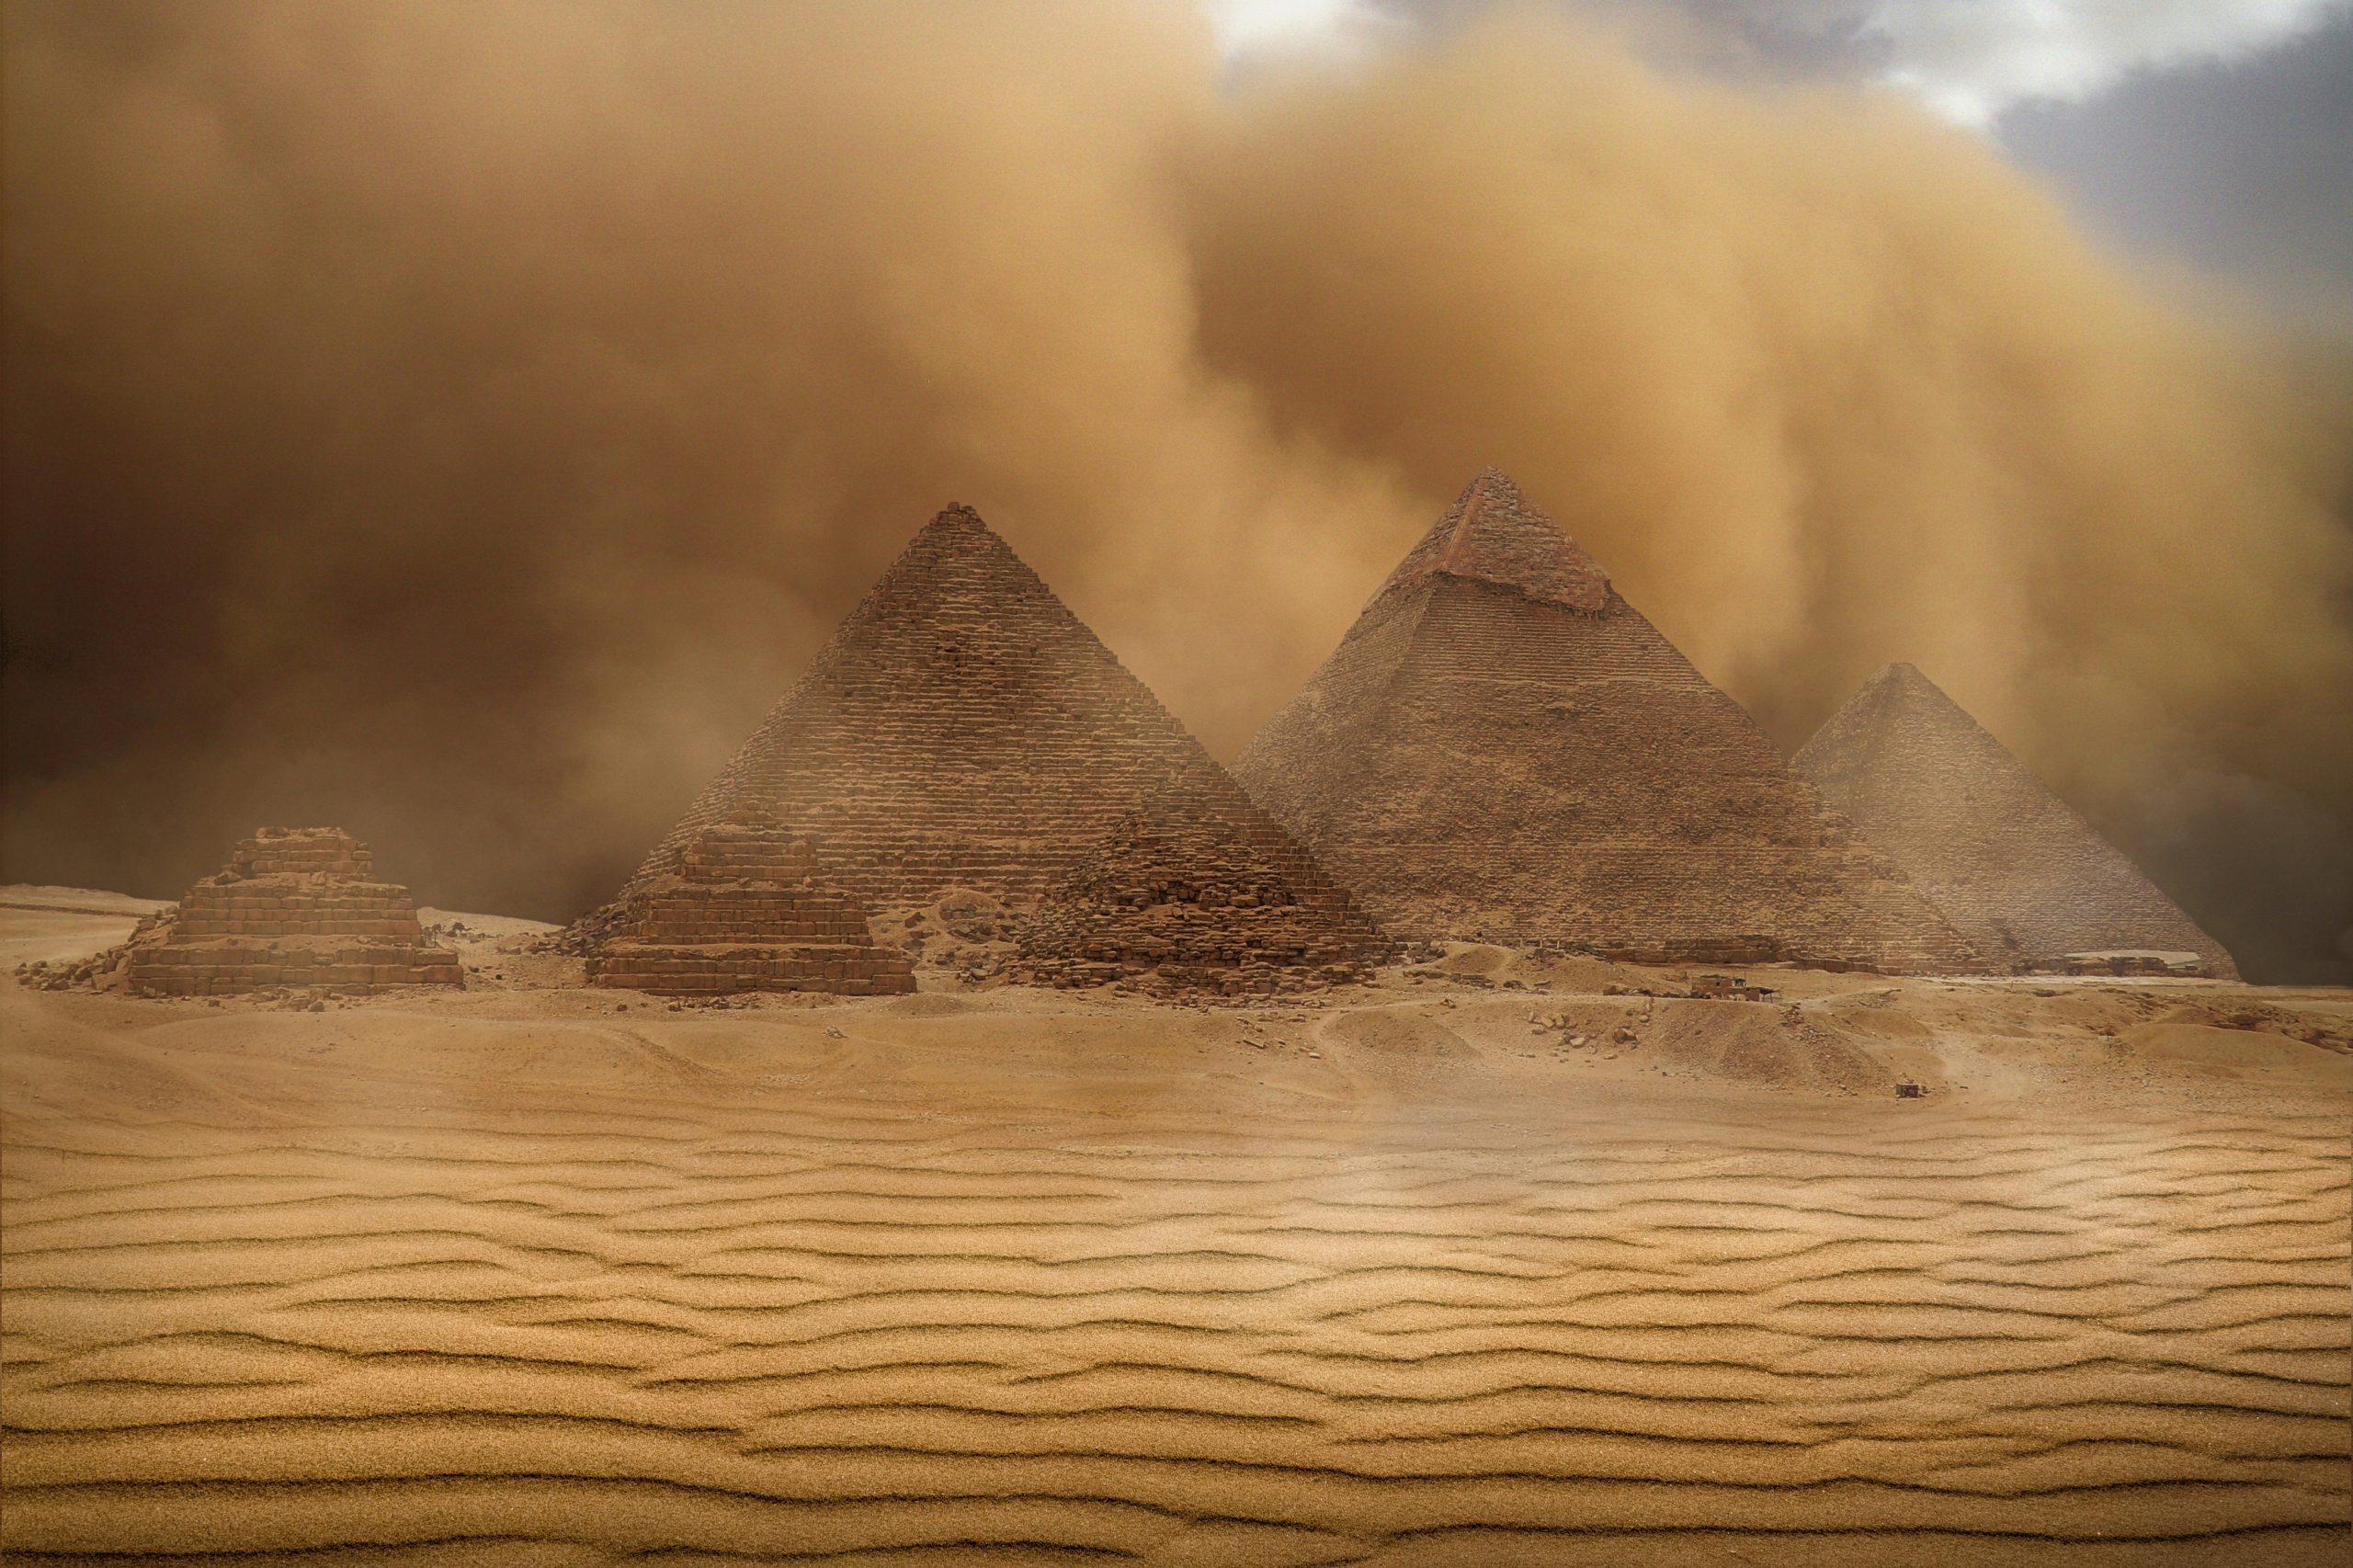 discover the wonder and mystery of pyramids around the world. from the iconic egyptian pyramids to the ancient wonders of mesoamerica, explore the history and significance of these impressive structures.